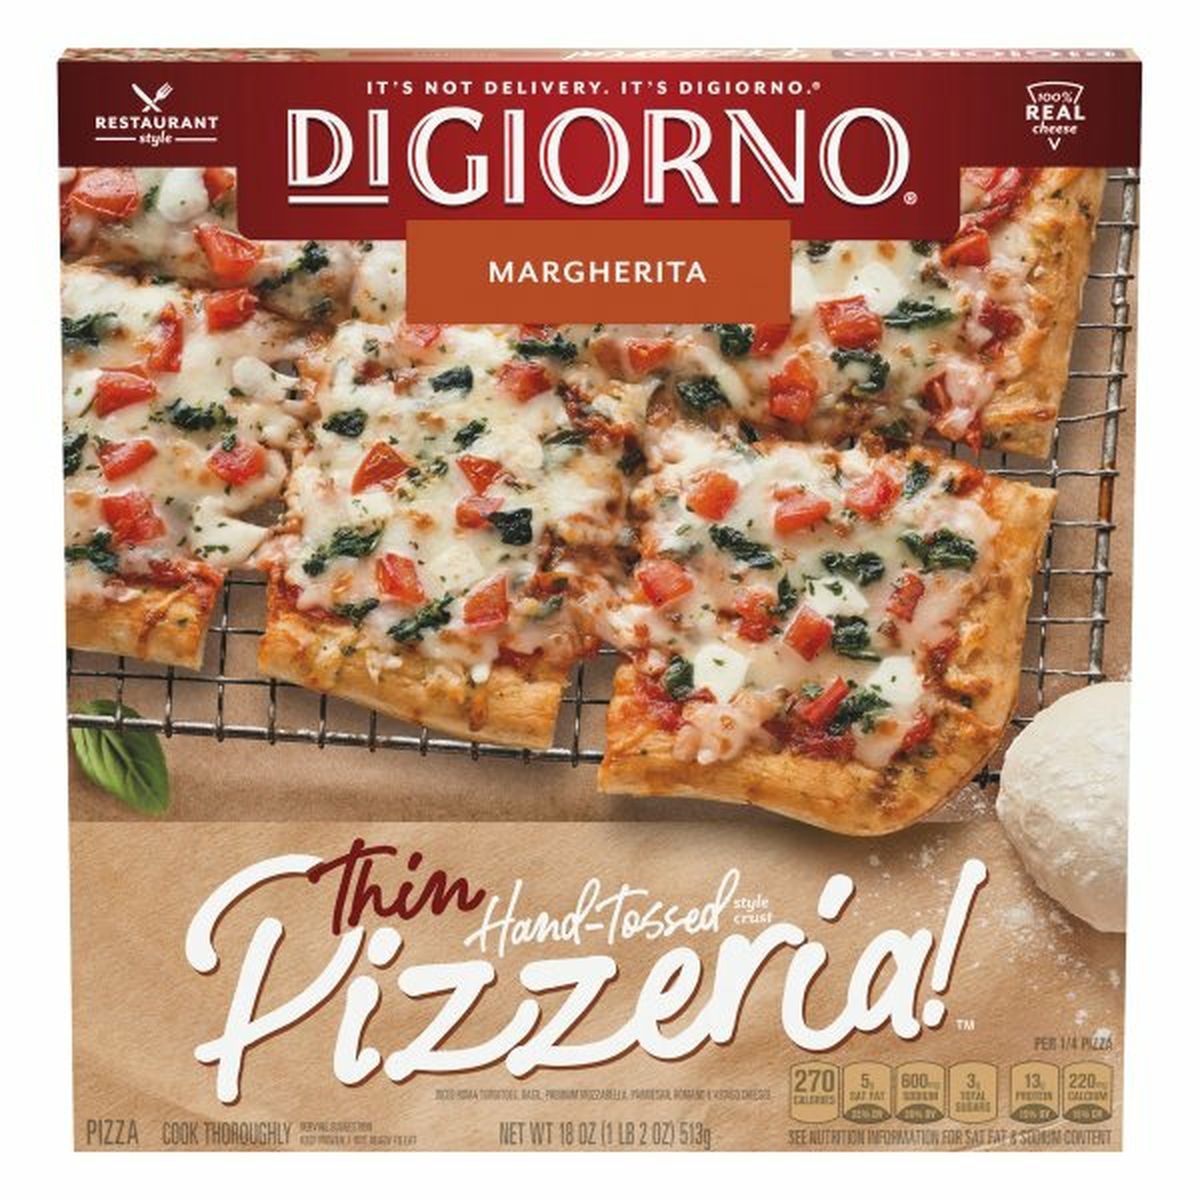 Calories in DiGiorno Pizza, Thin Hand-Tossed Style Crust, Margherita